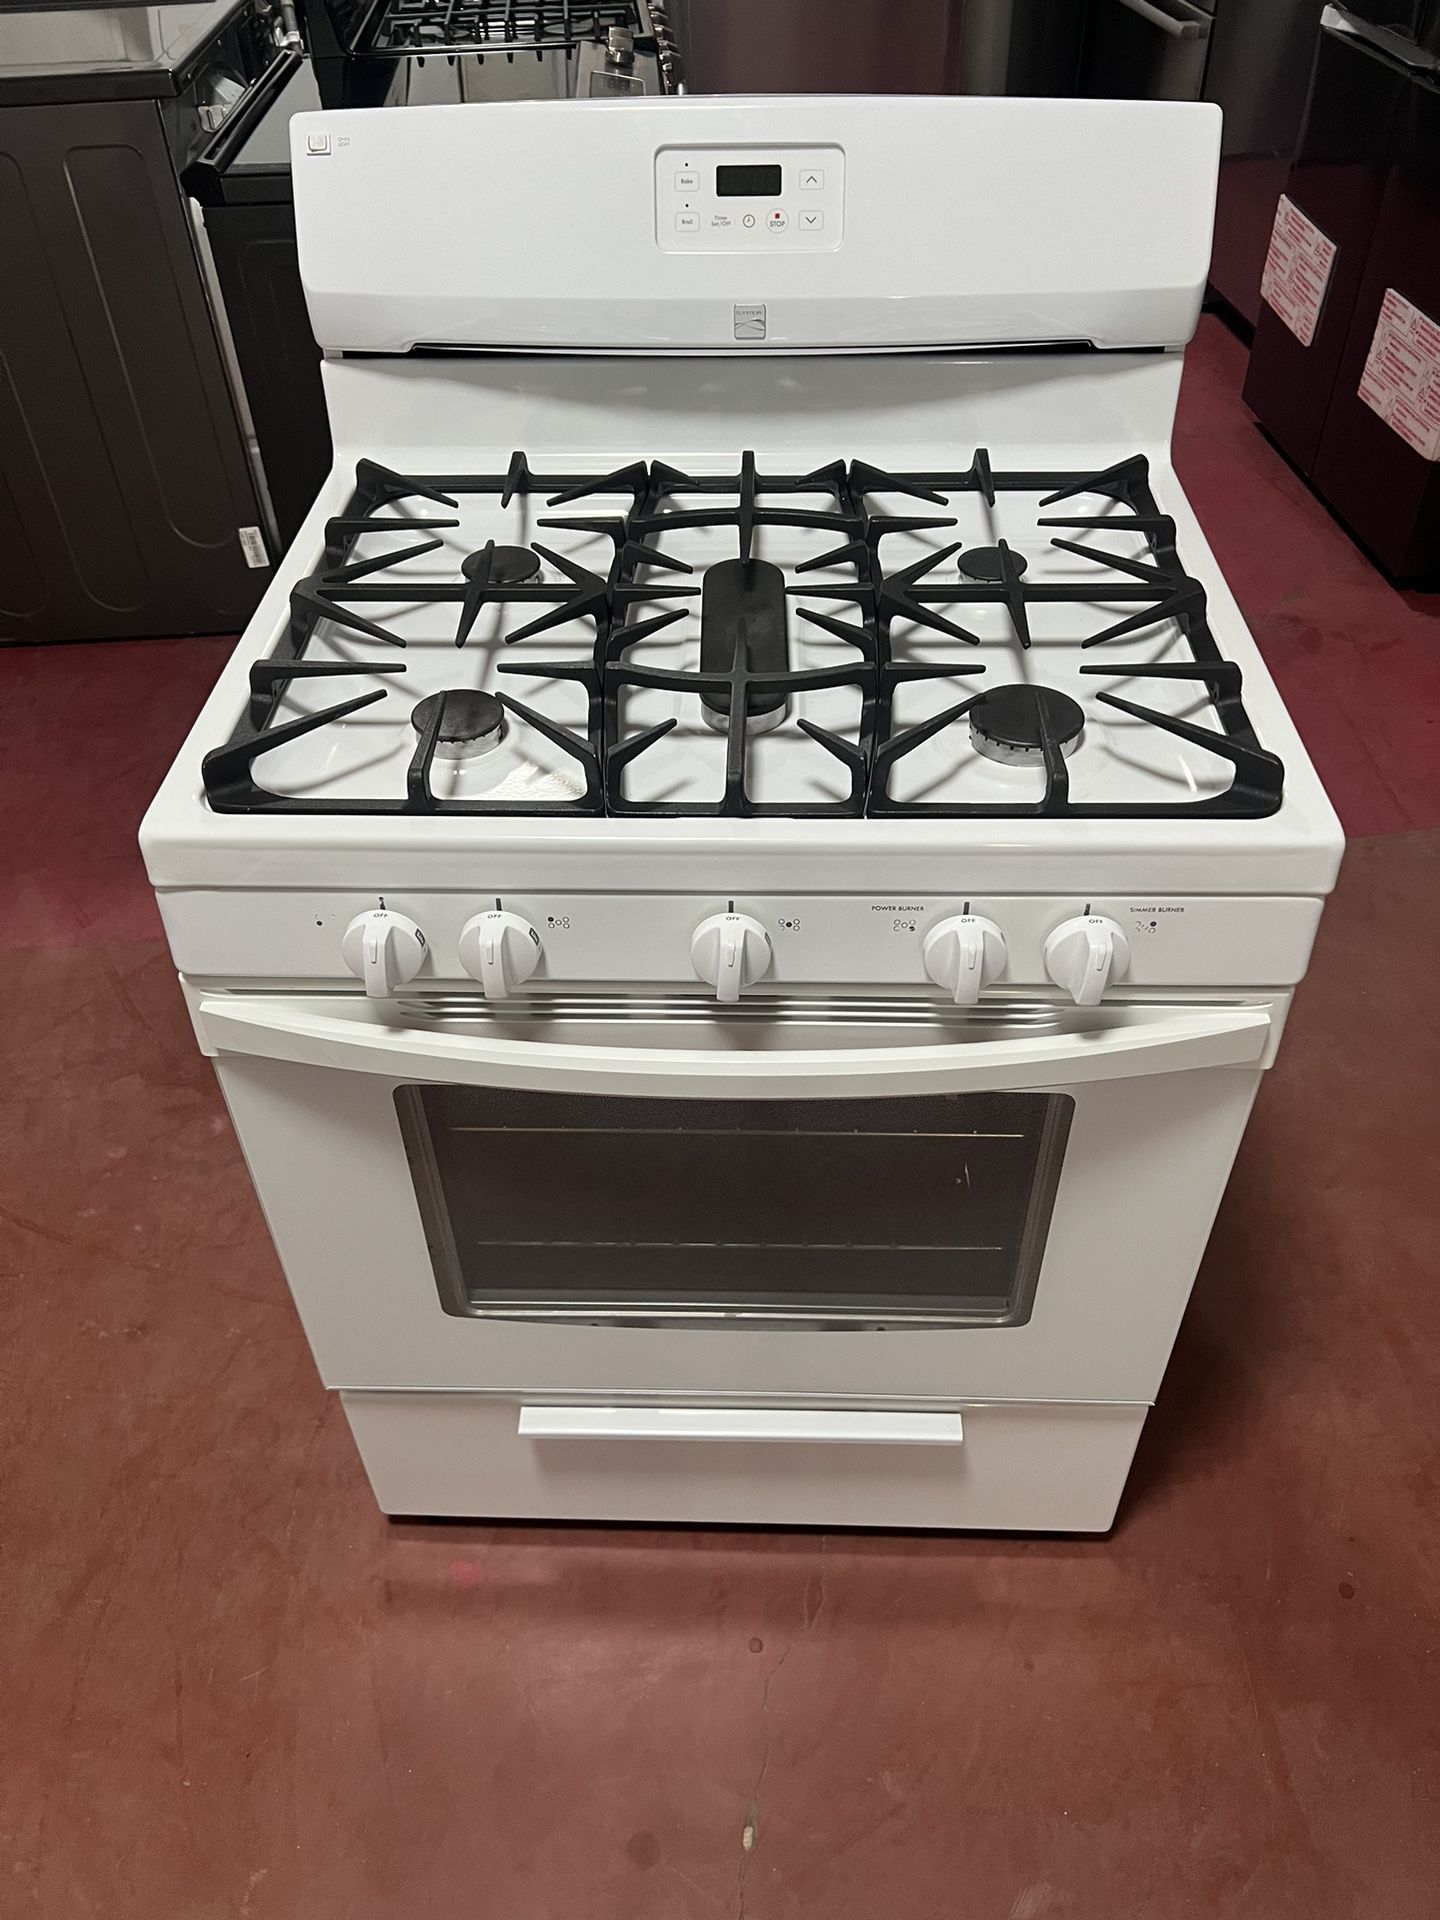 Kenmore 5-burner gas stove in perfect condition, delivered to your home and installed with a 3-month warranty